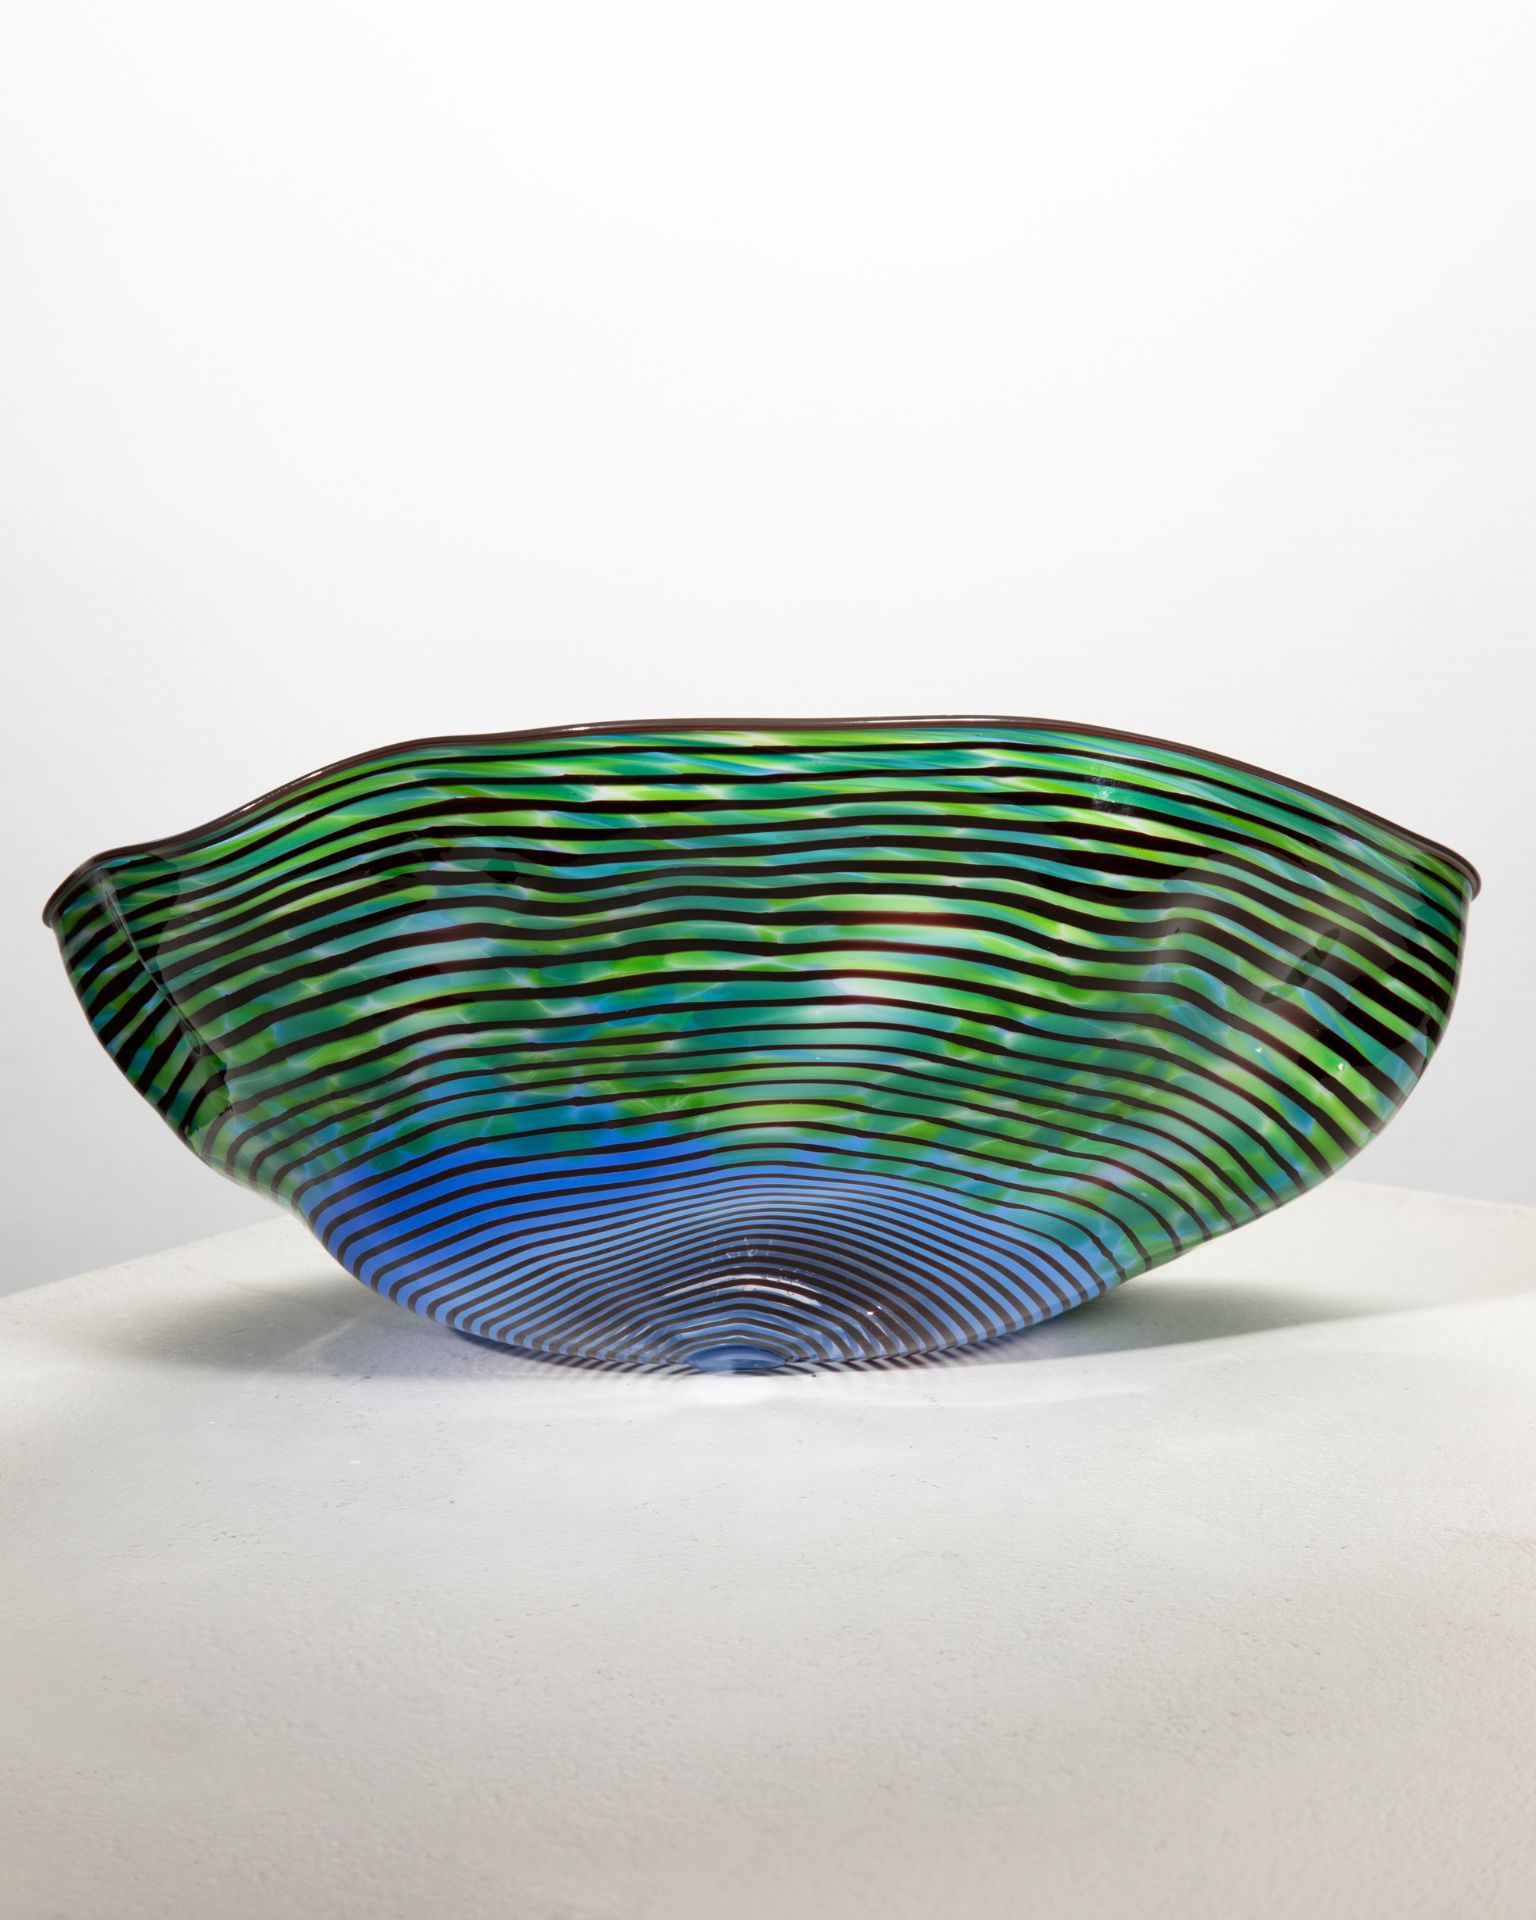 Dale Chihuly, 3 seaforms piece sculptural glasforms - Image 8 of 17